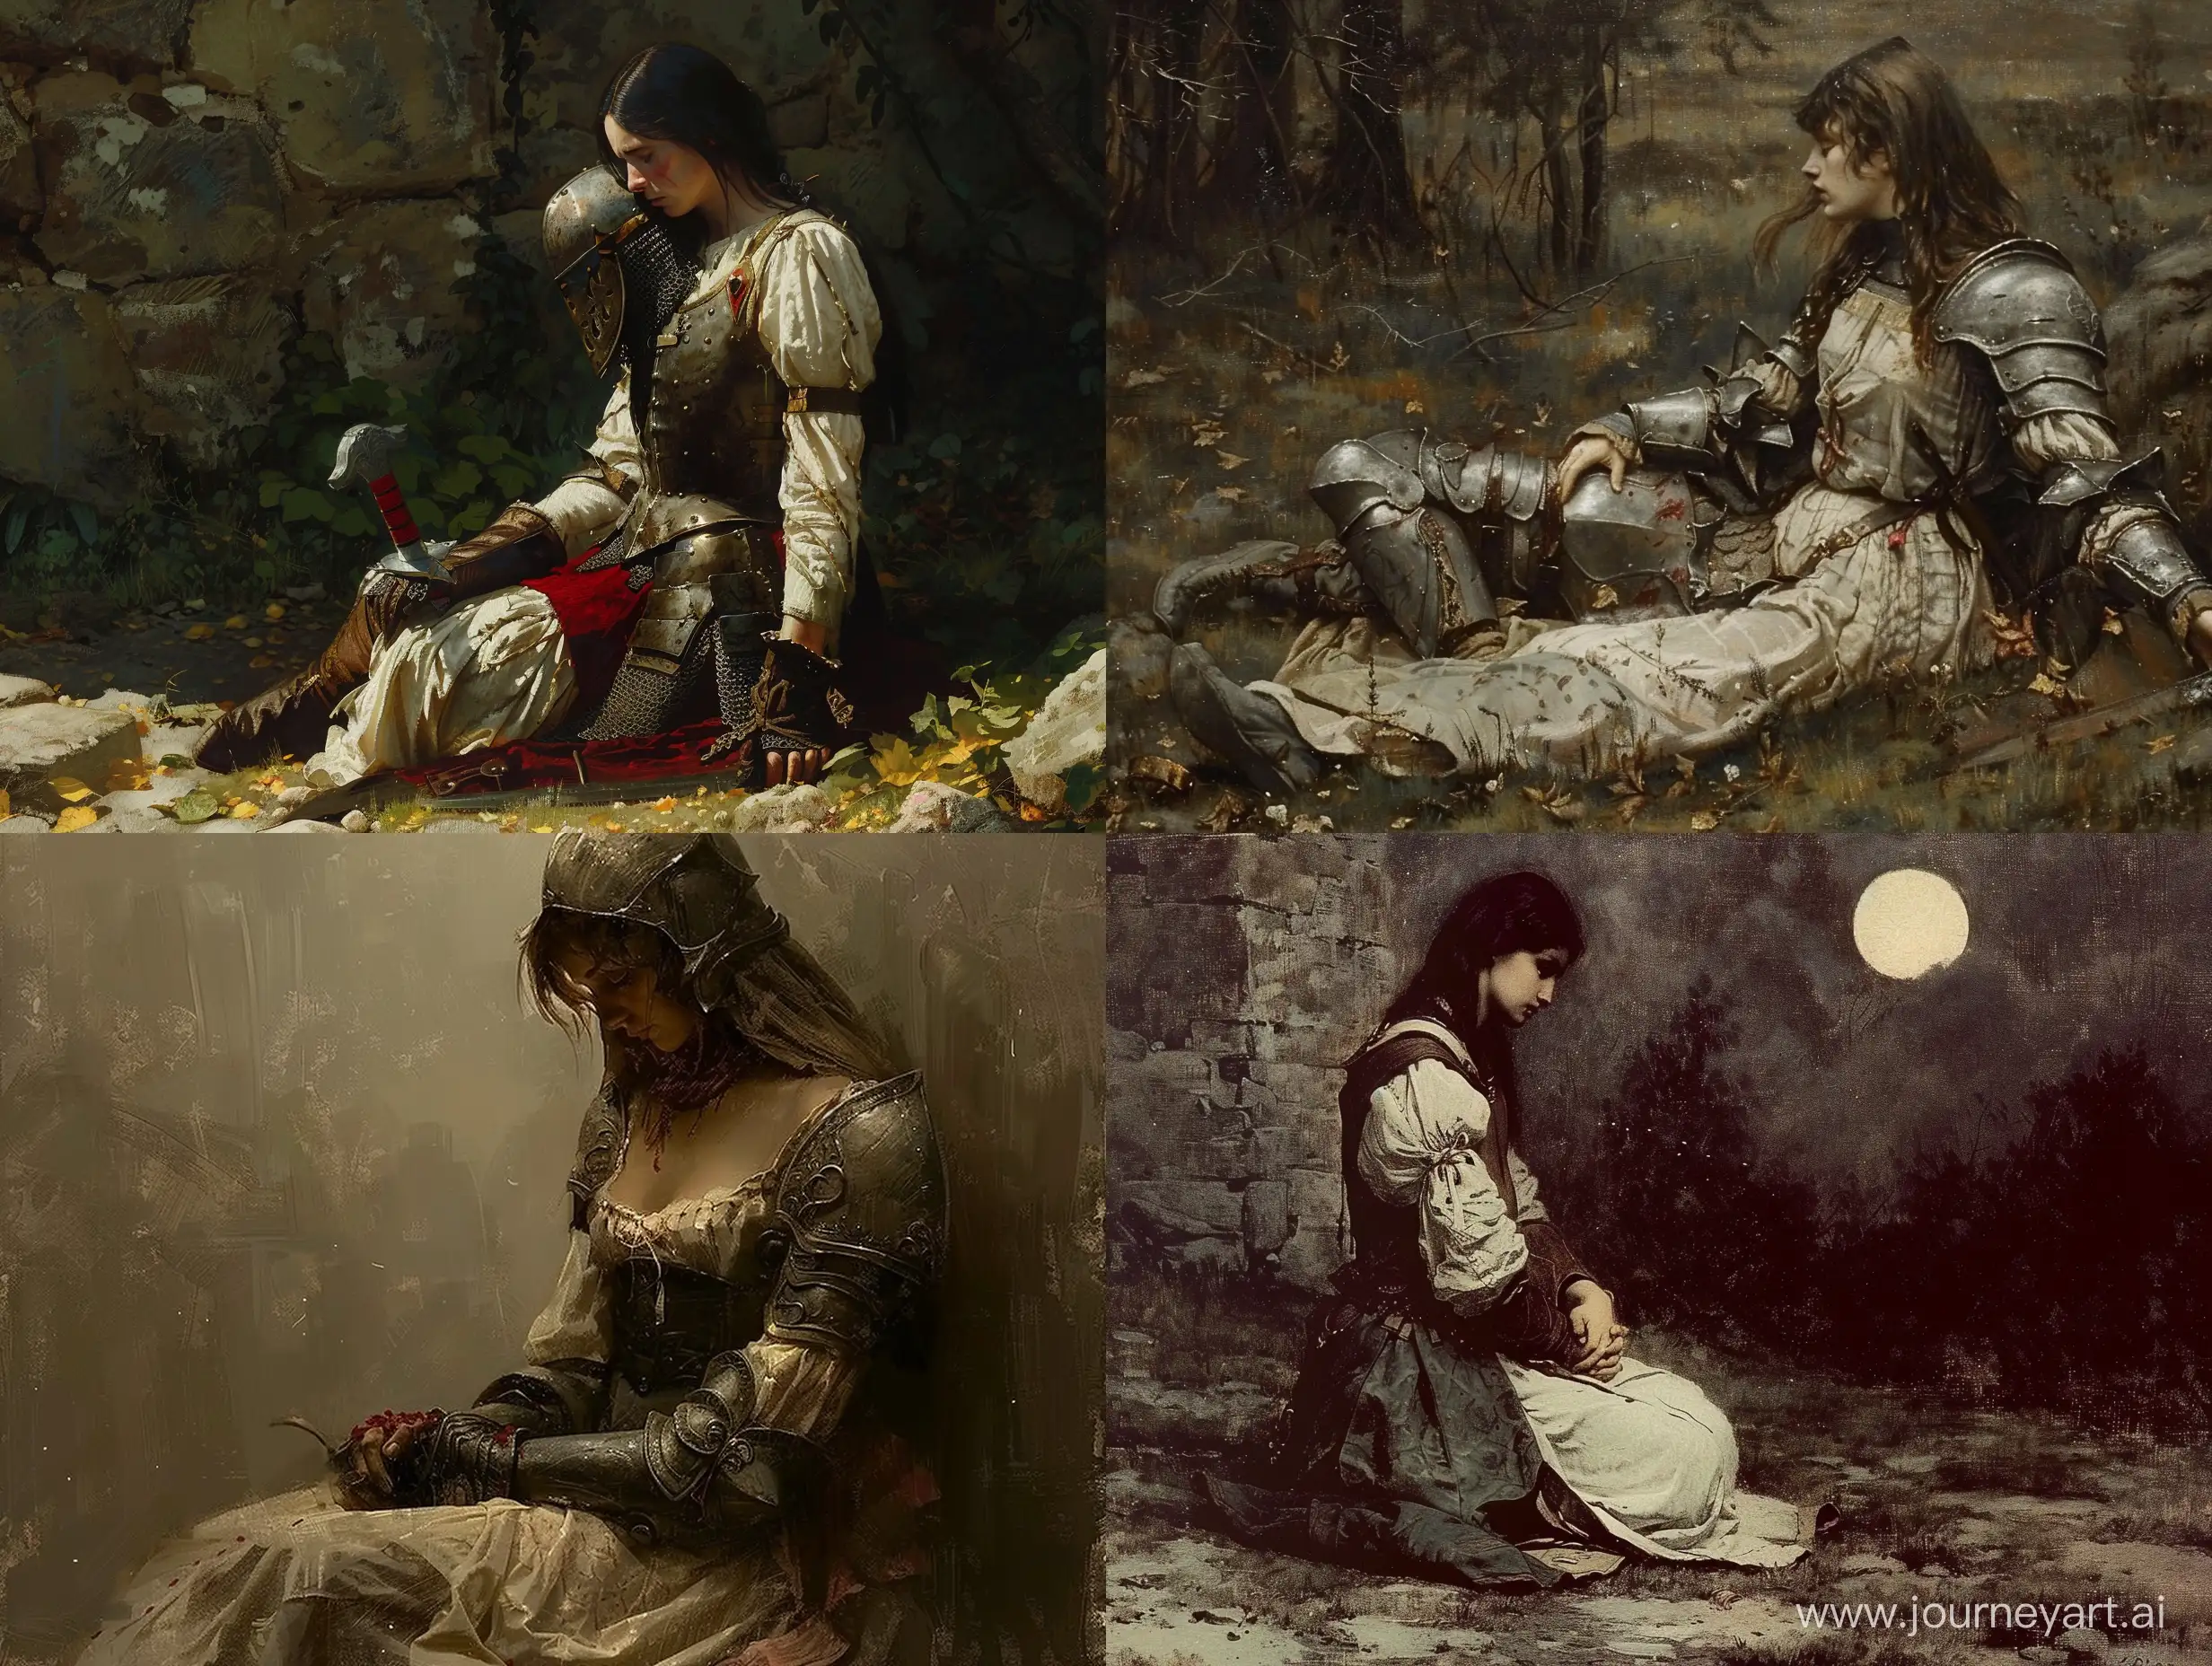 Medieval-Lady-Mourning-Betrothed-Knight-A-Scene-of-Sorrow-and-Honor